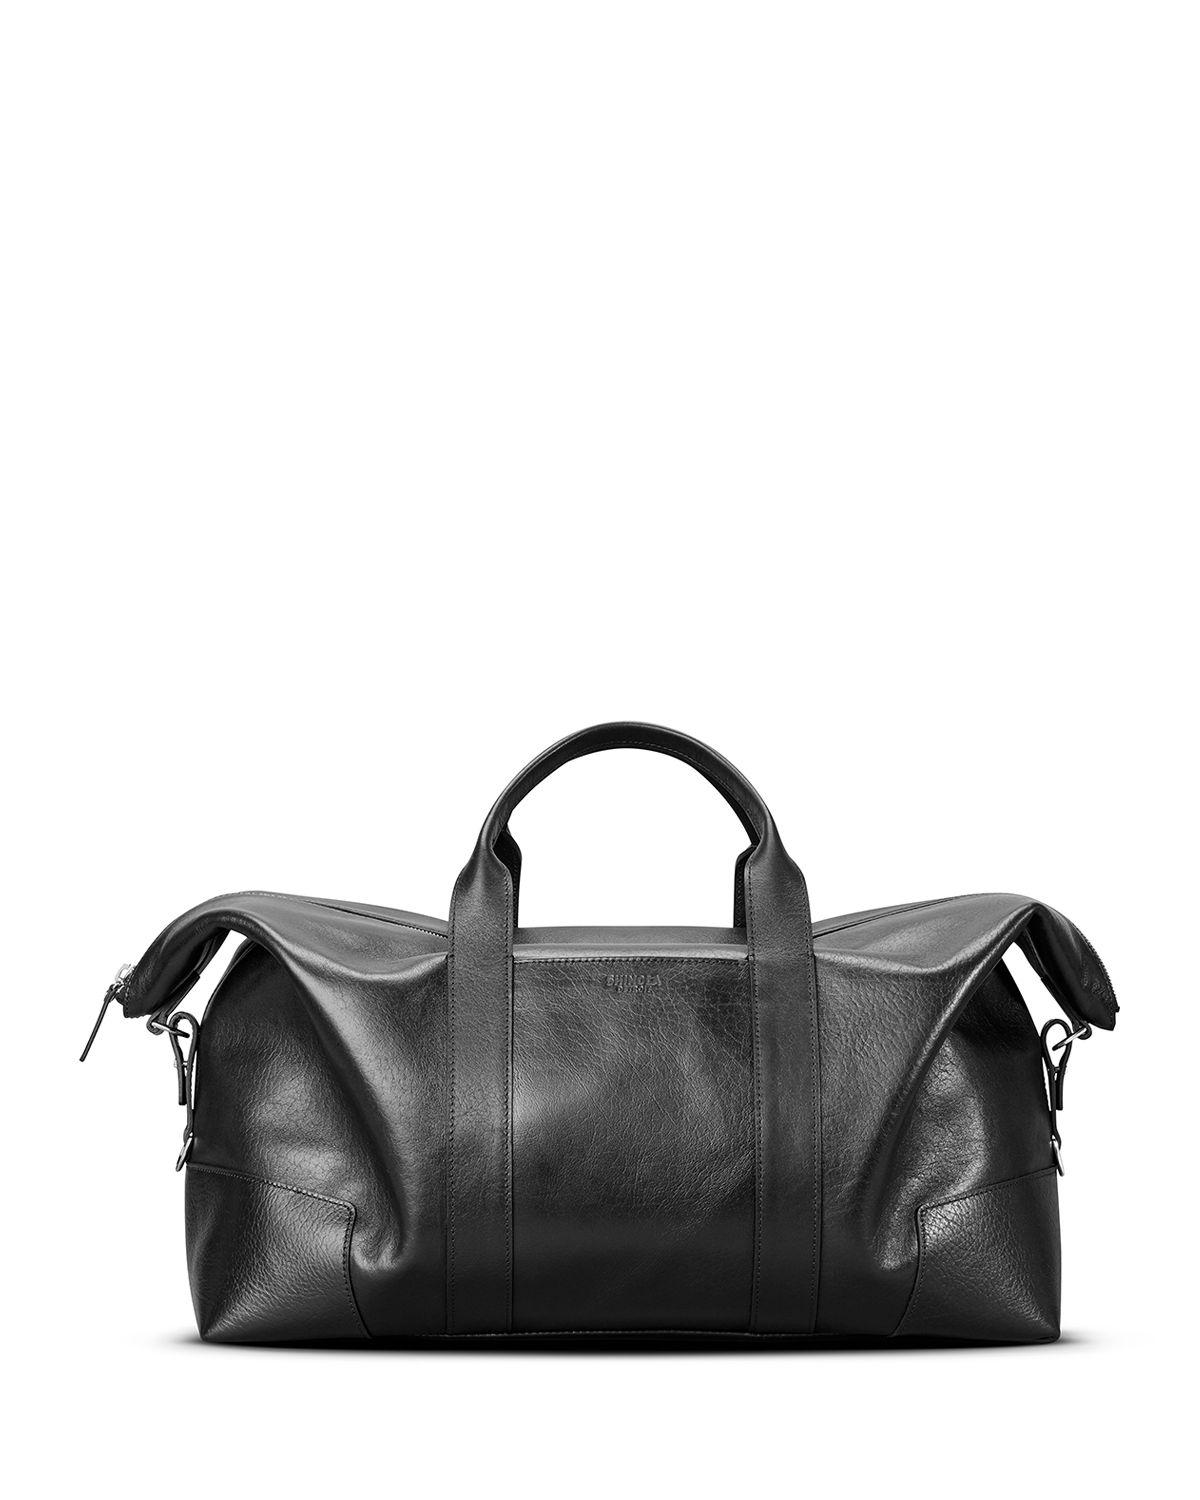 Lyst - Shinola Large Leather Carryall Duffle Bag in Black for Men